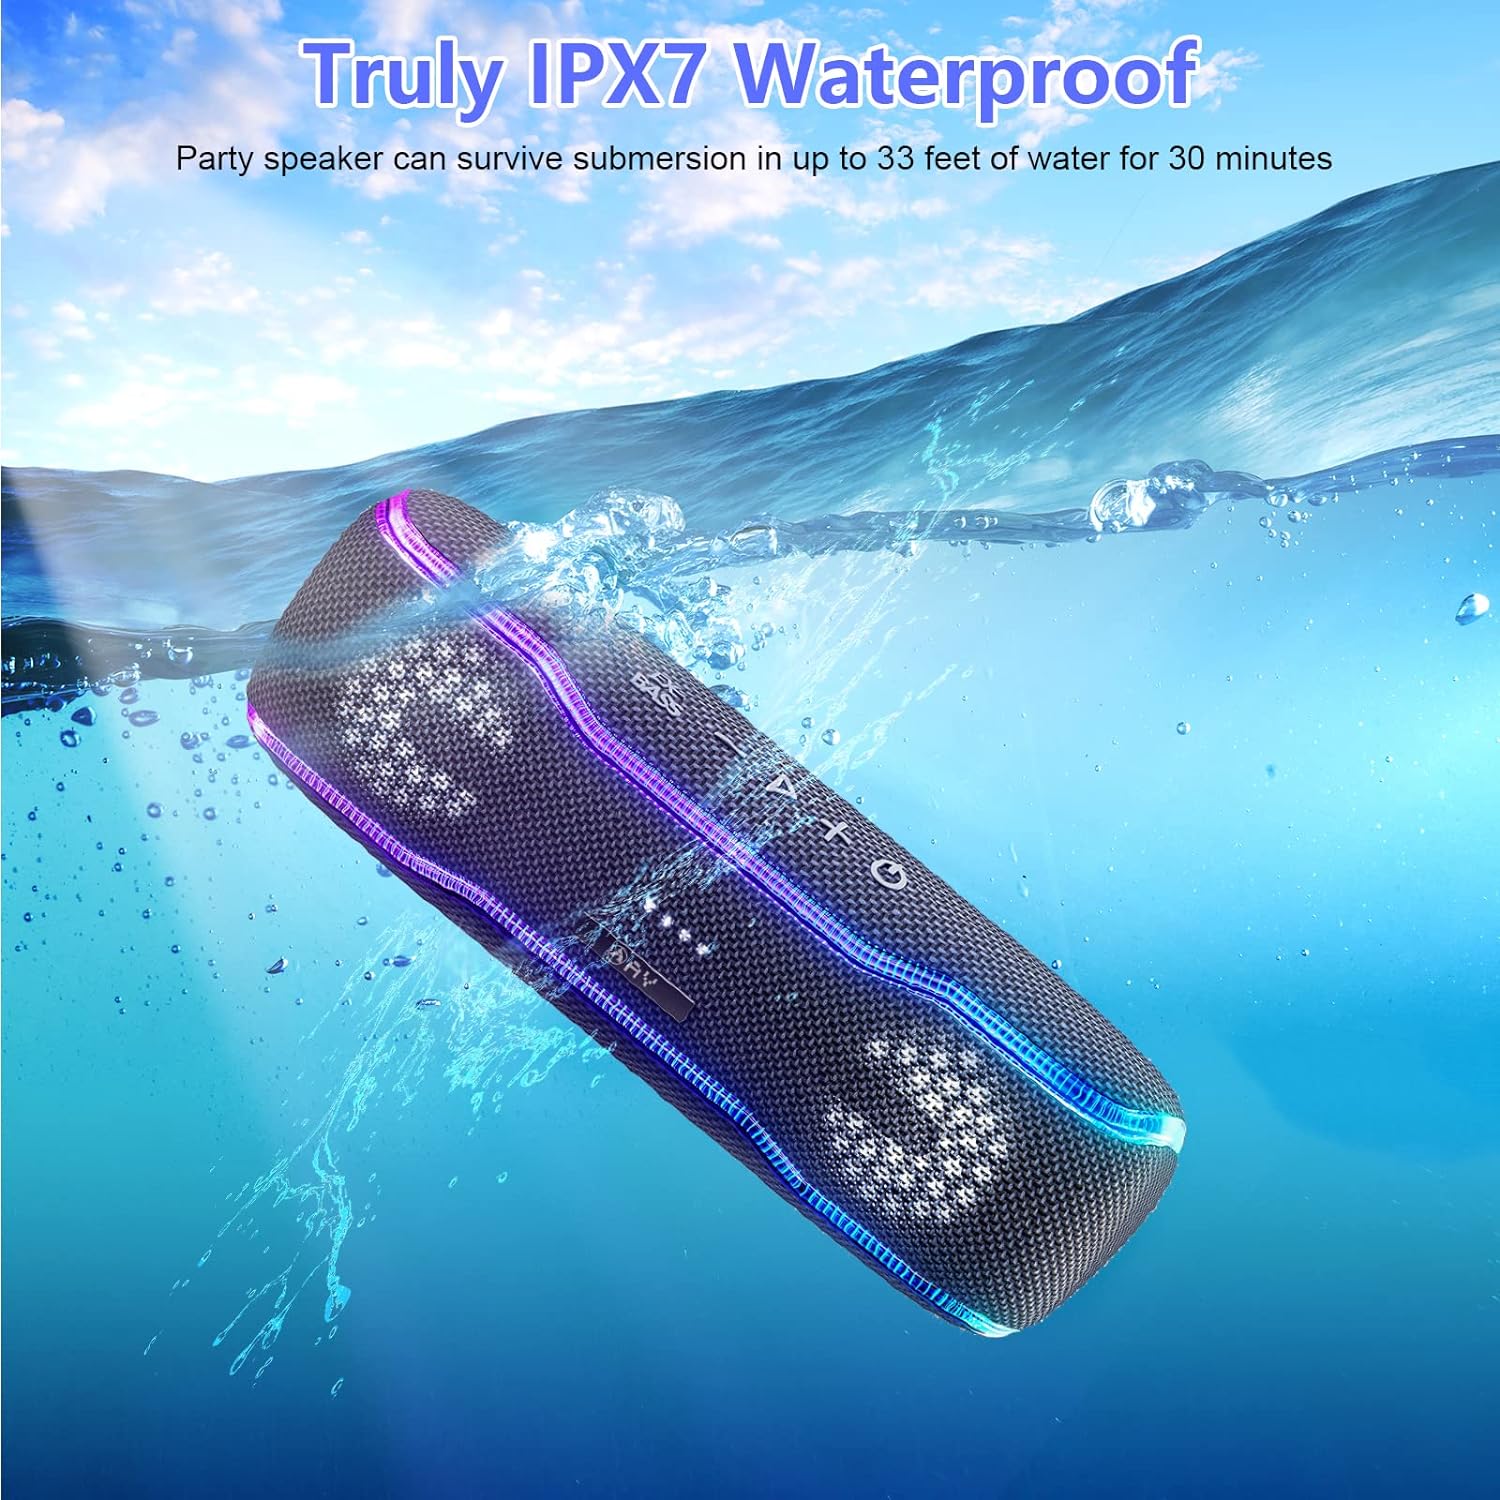 AY Bluetooth Speaker Music Box Portable IPX7 Waterproof Bluetooth Box with Colourful Light and Rich Bass, Stereo Pairing, Built-in Microphone, 24 Hour Battery, Perfect for Beach, Home, Outdoor